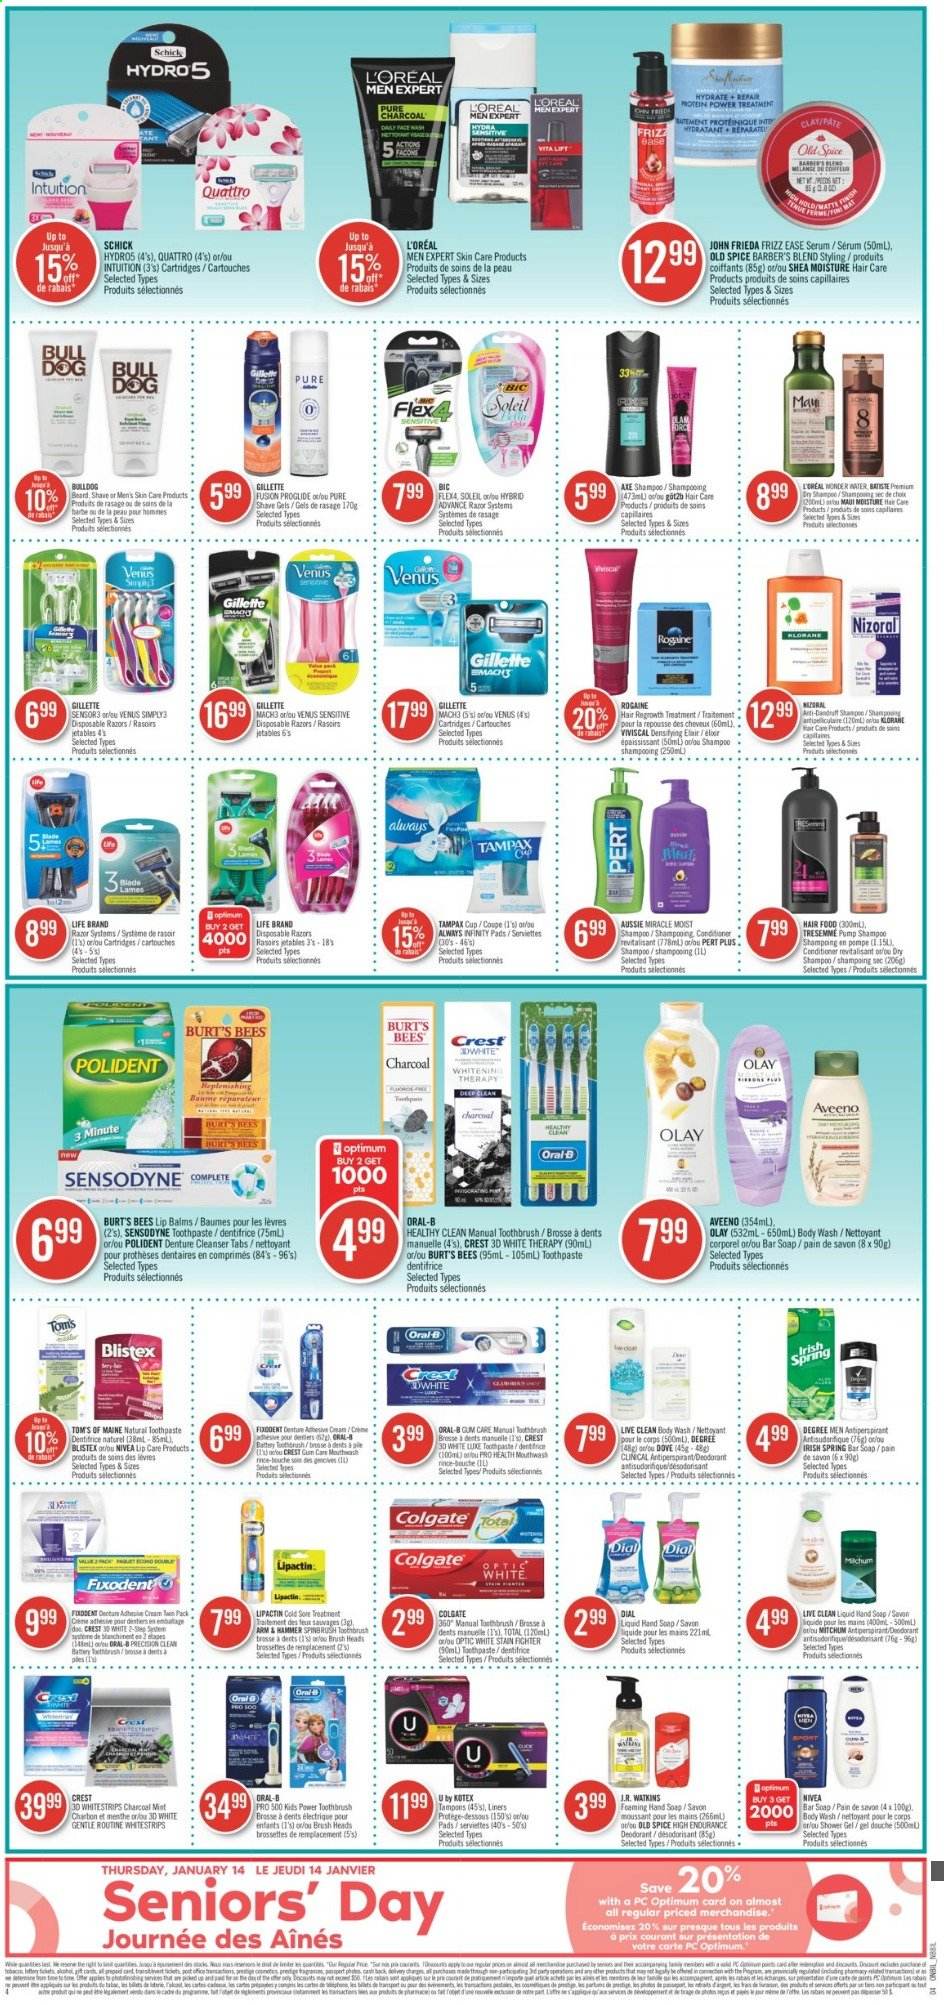 thumbnail - Shoppers Drug Mart Flyer - January 09, 2021 - January 15, 2021 - Sales products - ARM & HAMMER, spice, Aveeno, body wash, hand soap, soap bar, Dial, soap, toothbrush, toothpaste, mouthwash, Fixodent, Polident, Crest, Kotex, tampons, cleanser, L’Oréal, serum, Olay, L’Oréal Men, Aussie, conditioner, TRESemmé, John Frieda, Klorane, anti-perspirant, BIC, razor, Schick, Venus, disposable razor, Gillette, shampoo, Tampax, Nivea, Old Spice, Oral-B, Sensodyne, deodorant. Page 4.